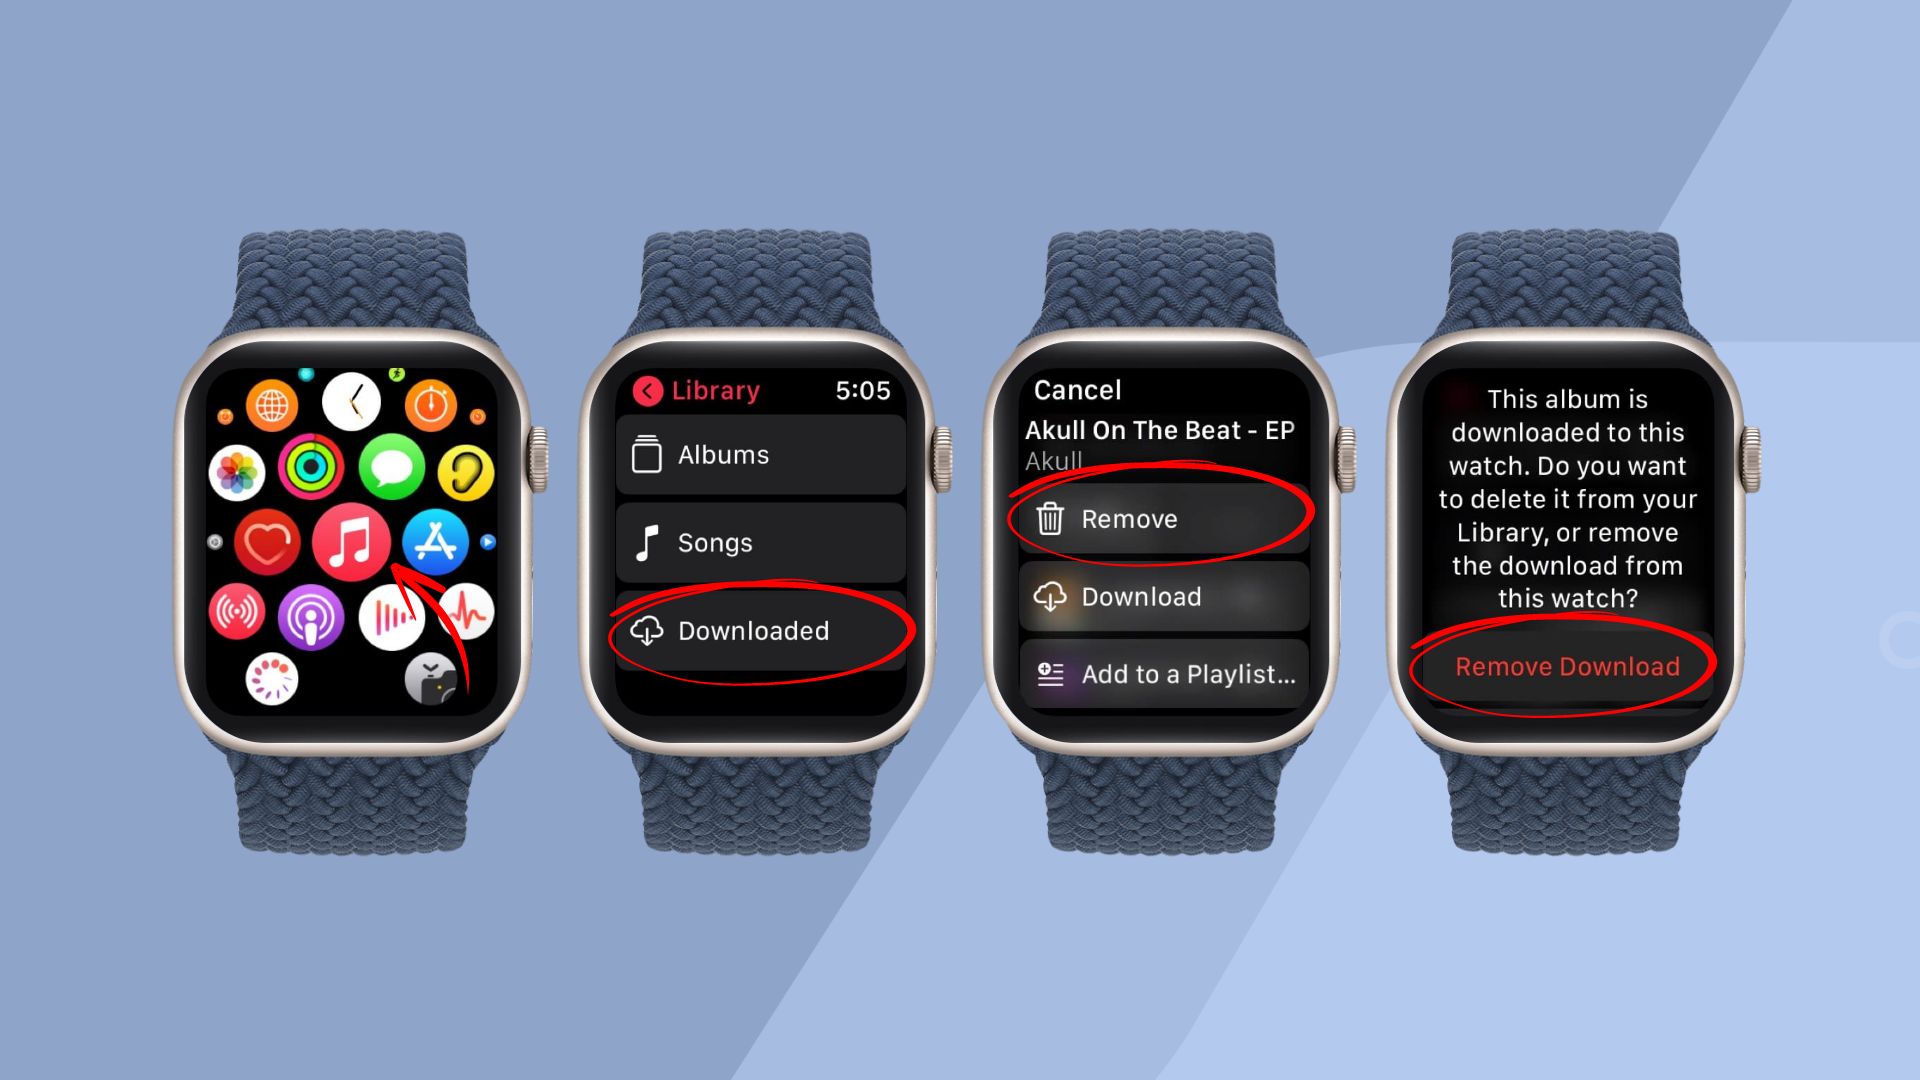 steps on how to remove music directly from an Apple Watch